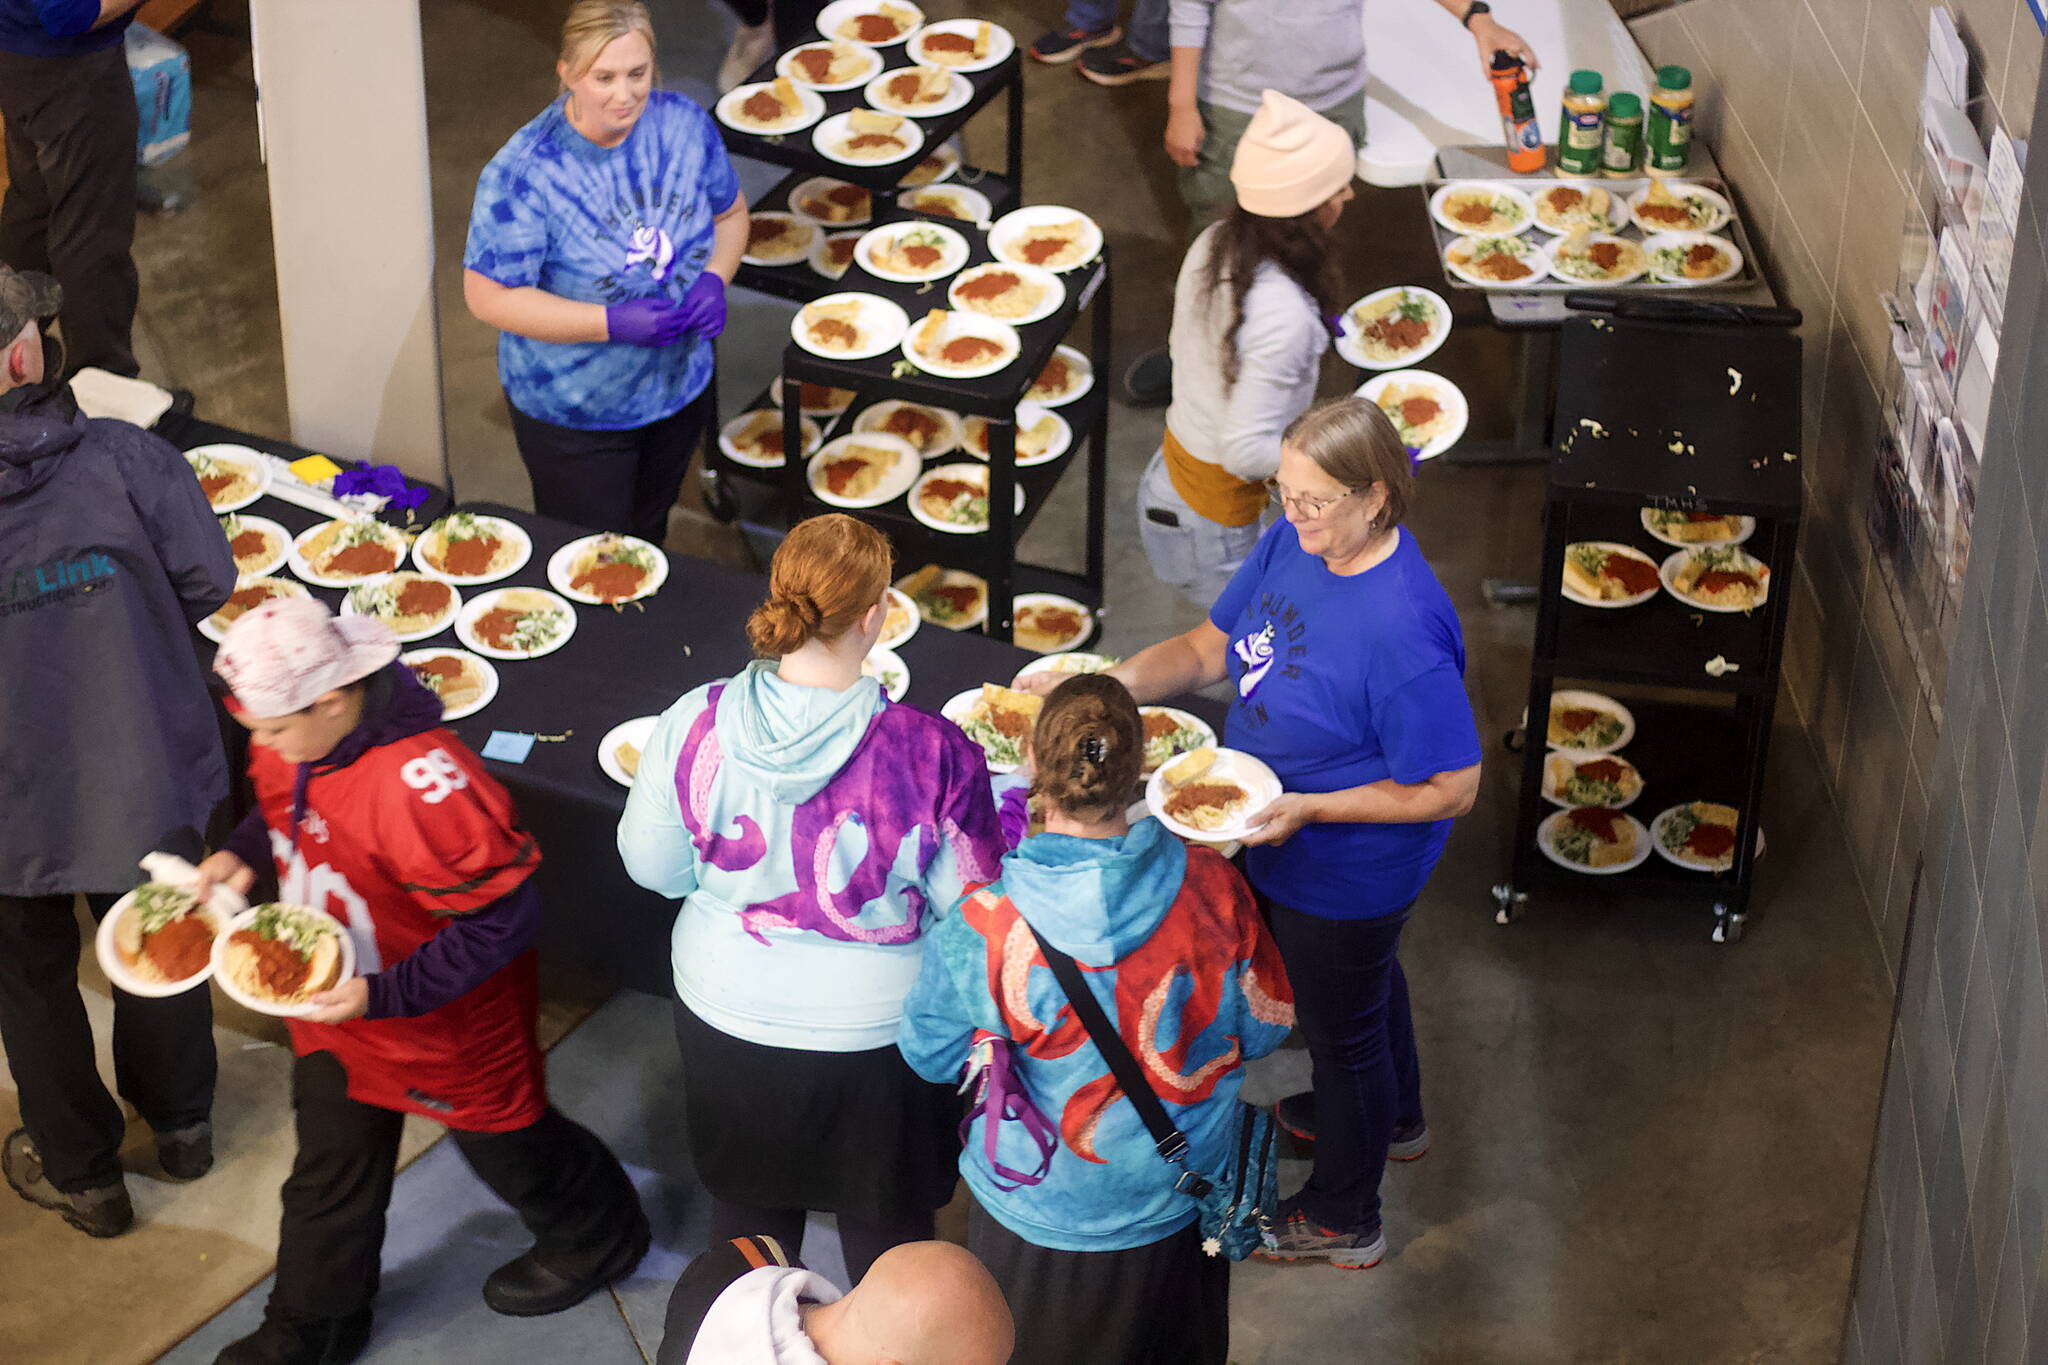 Carol May (right), a teacher at Thunder Mountain High School, hands out plates of food during a fundraising dinner and auction at Saturday night to benefit victims of a flood earlier this month. (Mark Sabbatini / Juneau Empire)